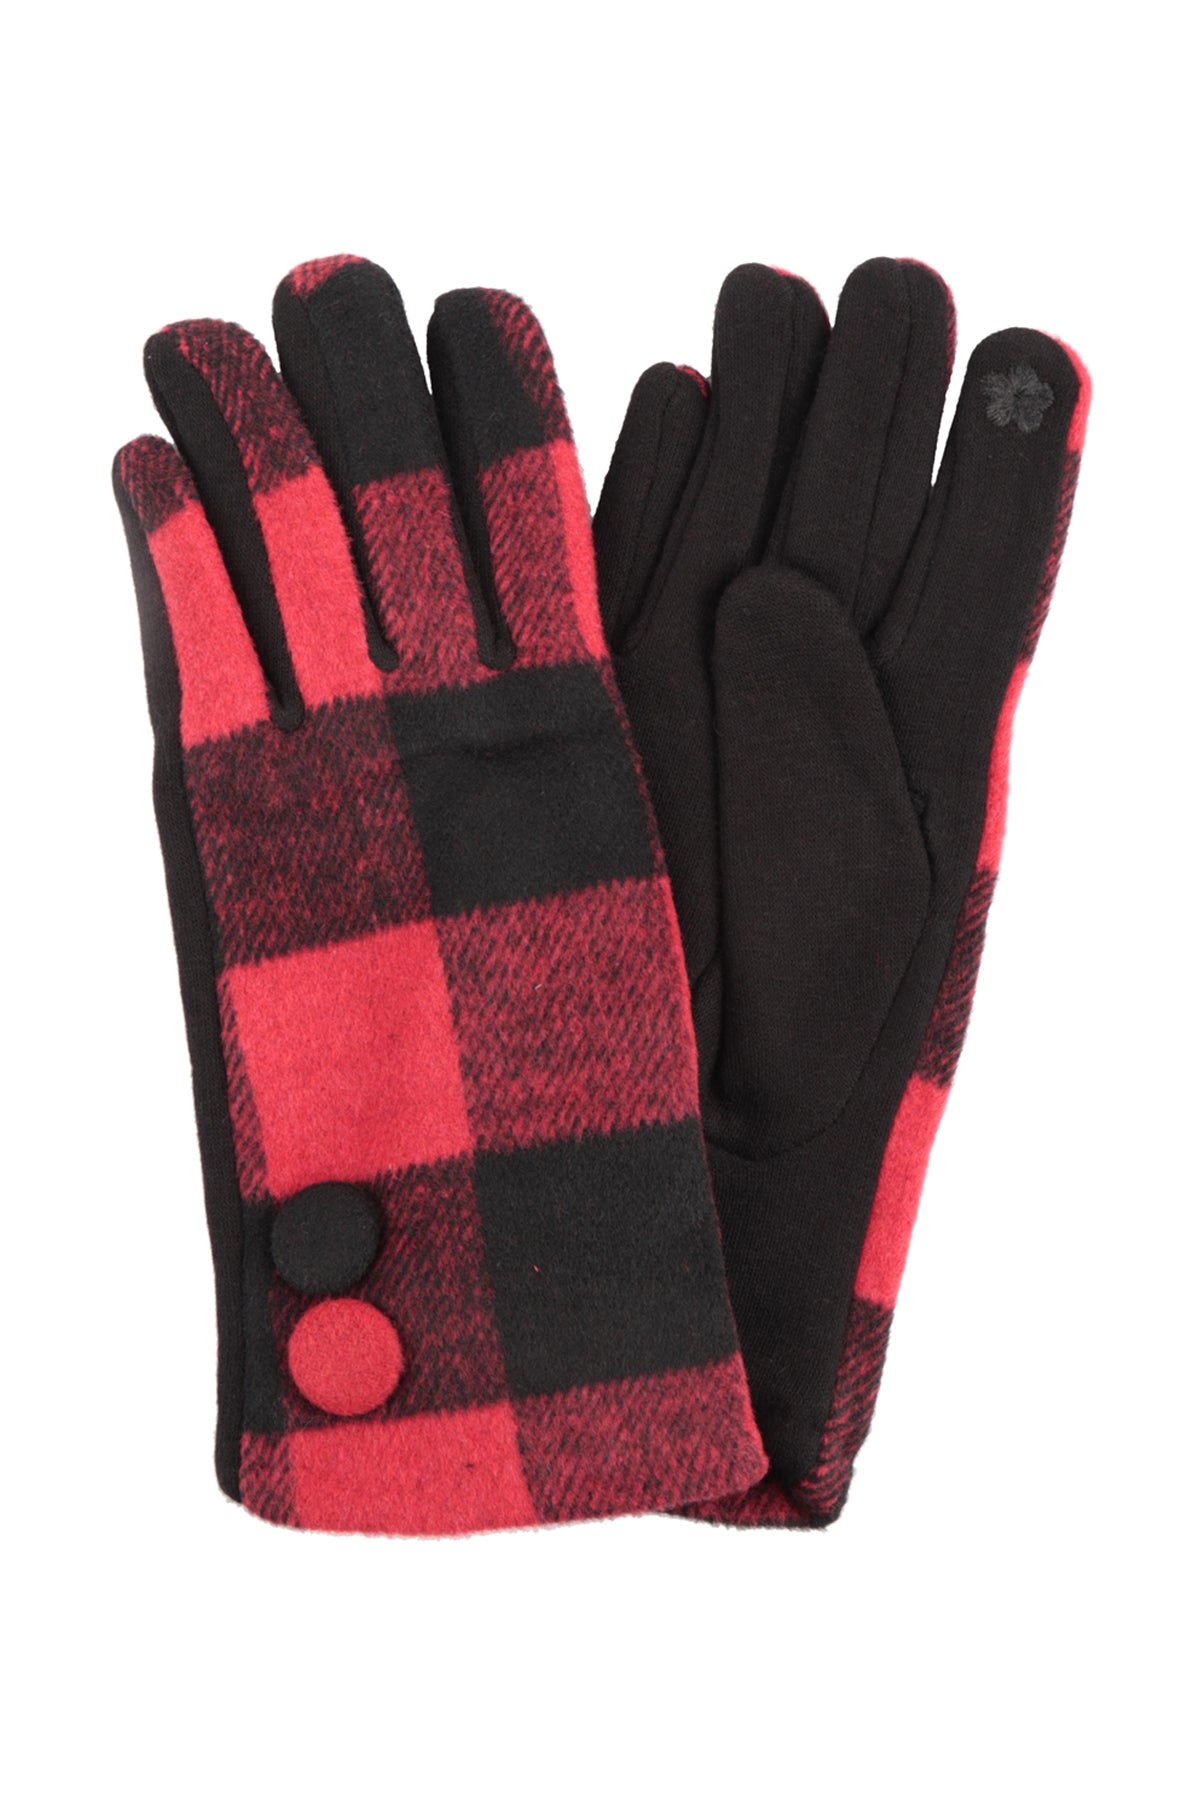 BUFFALO PLAID SMART TOUCH W BUTTON GLOVES/6PCS (NOW $2.75 ONLY!)